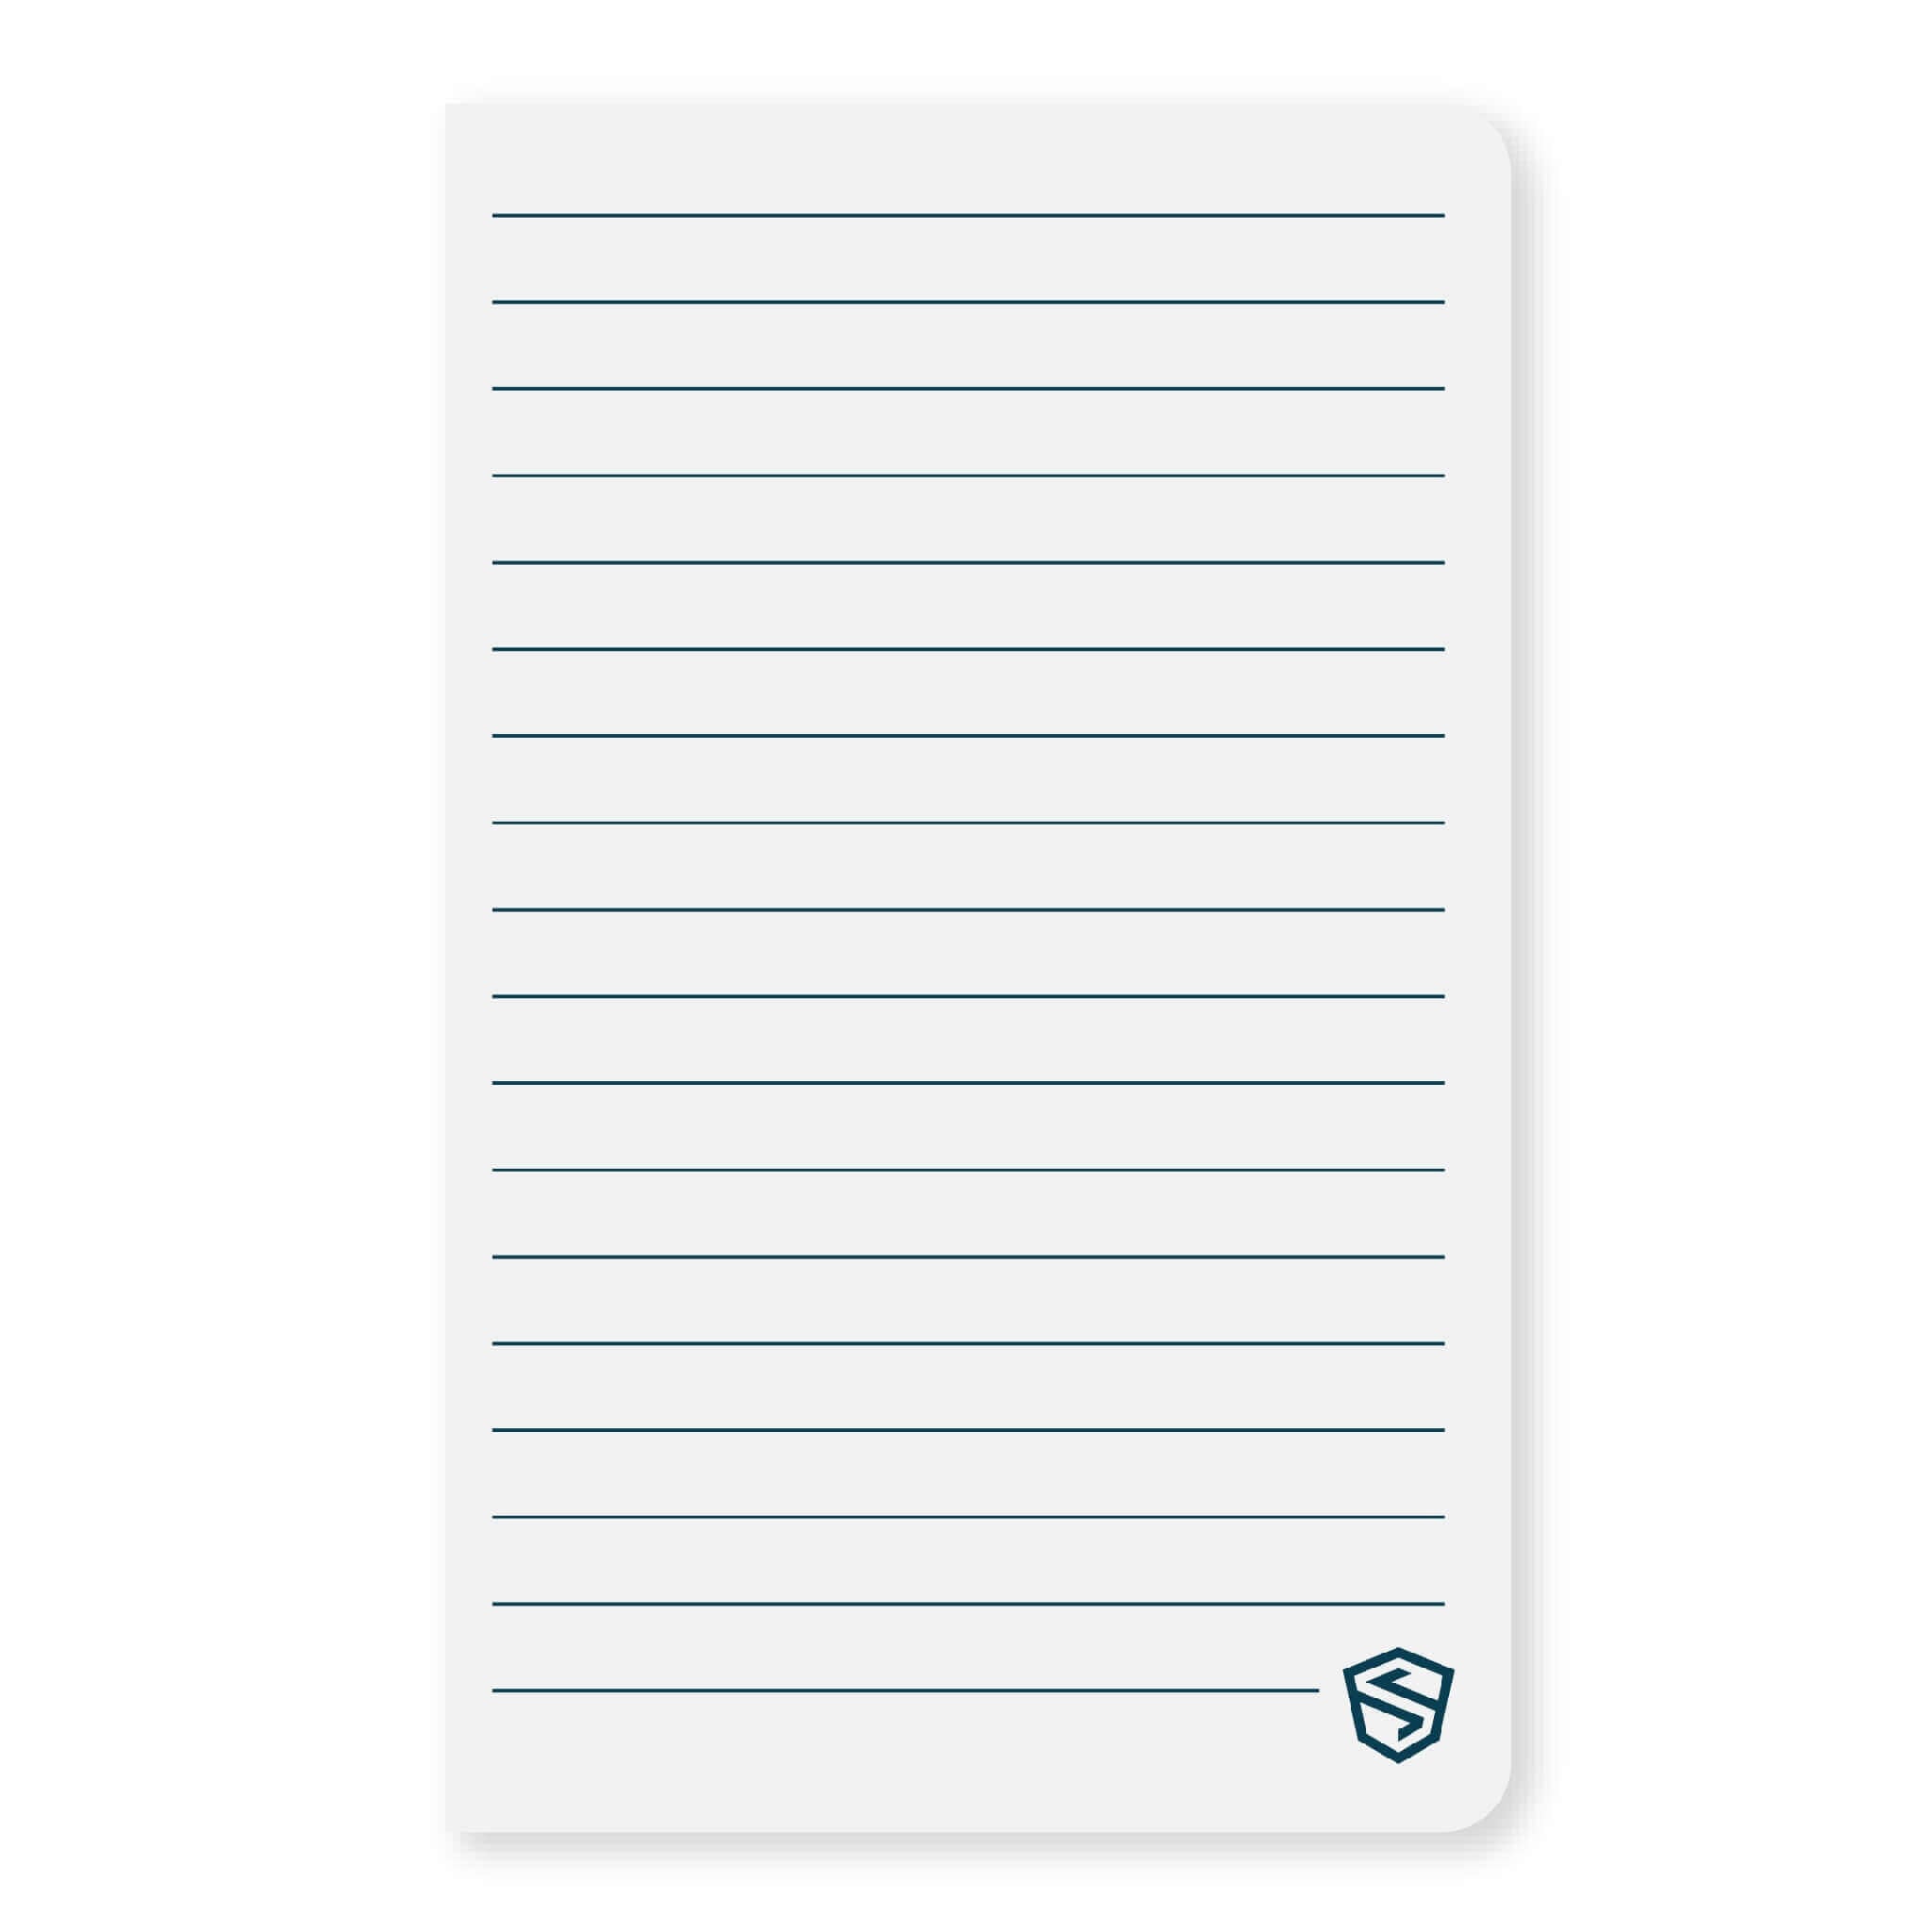 A lined page from the Stonebook ™ Notebook where you and write any additional information about your cryptocurrency